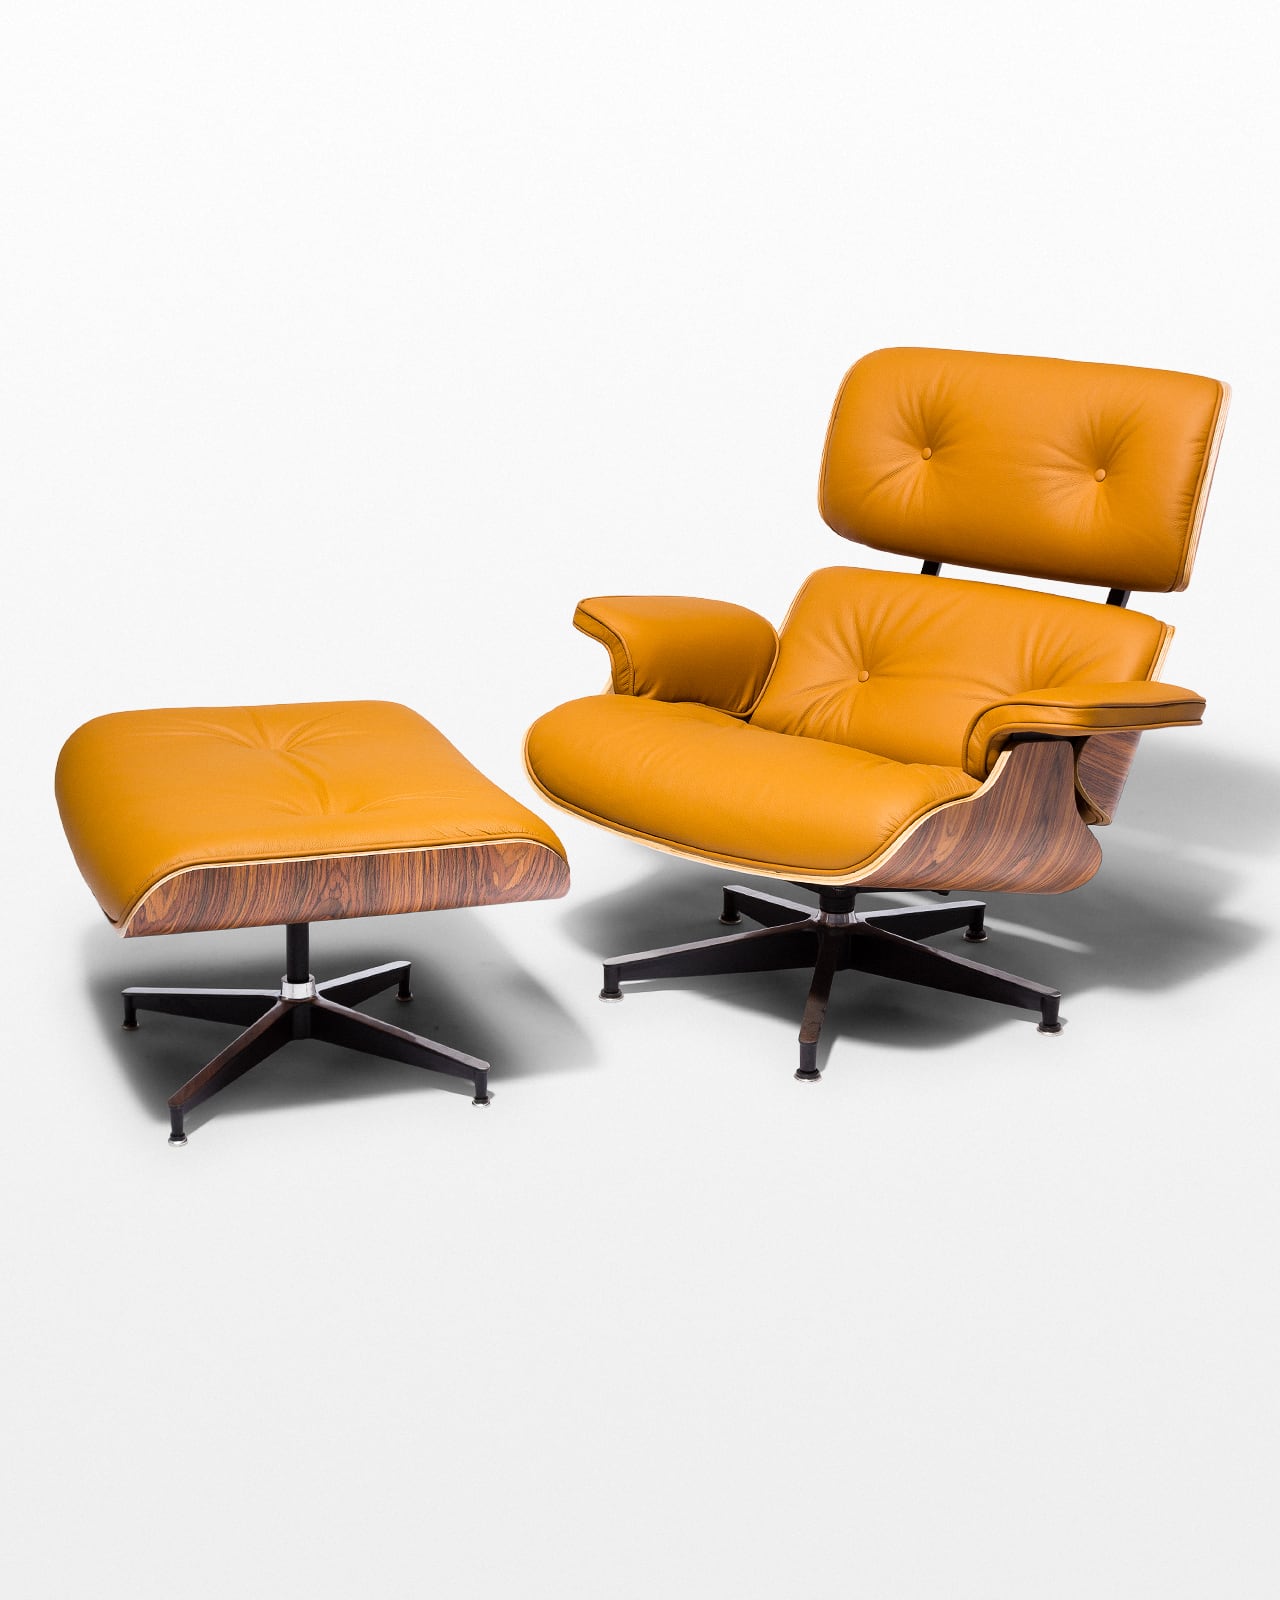 Ch588 Brown Eames Style Lounge Chair, Eames Style Lounge Chair And Ottoman